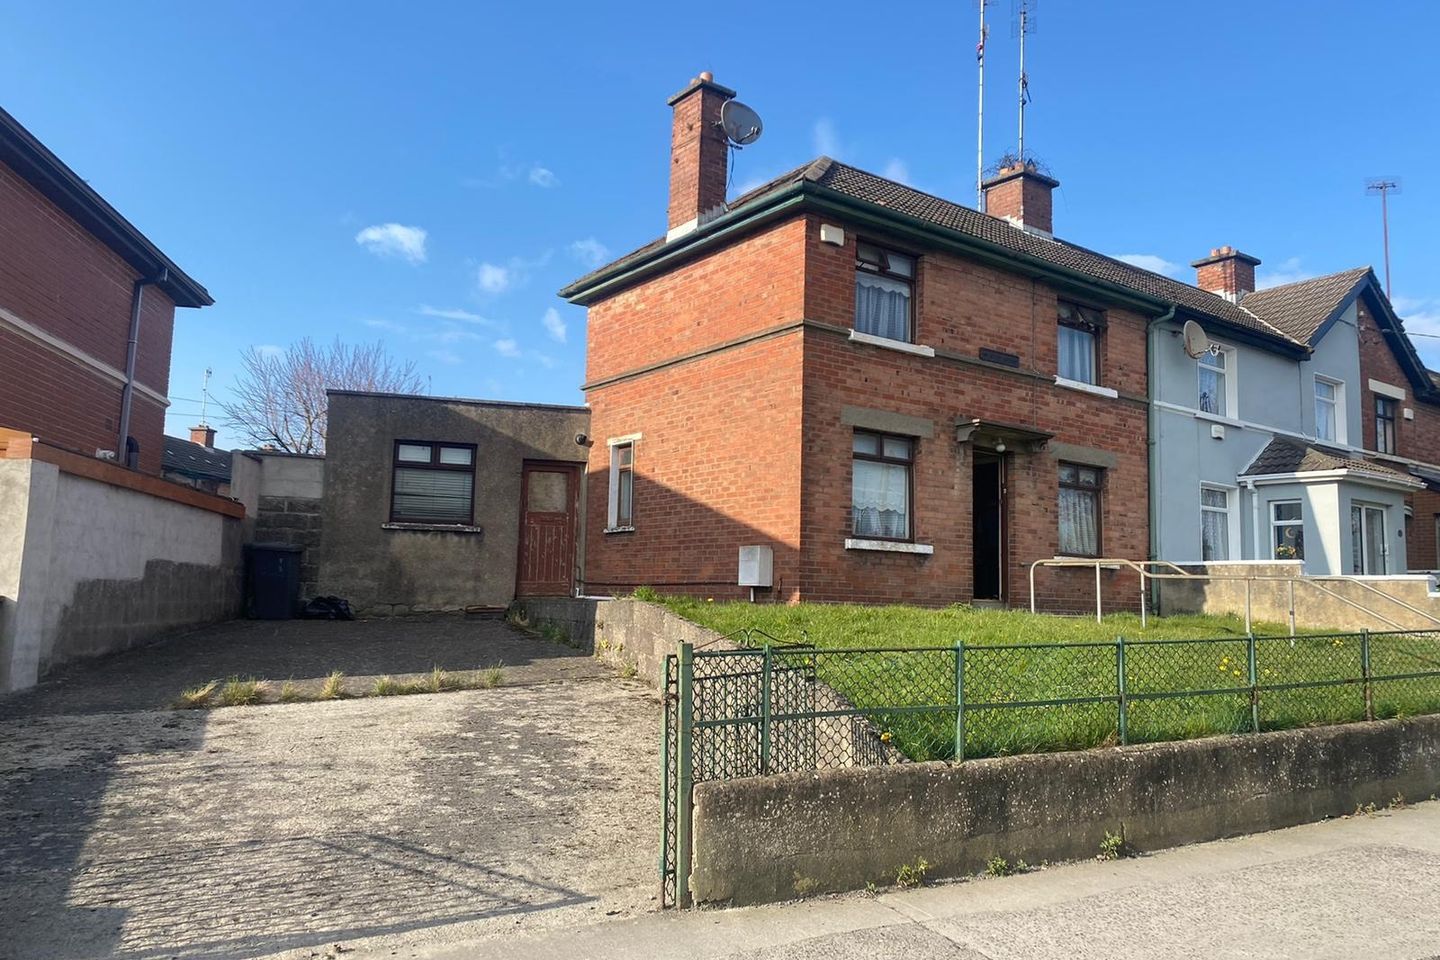 161 Pearse Park, Drogheda, Co. Louth, A92X7YD